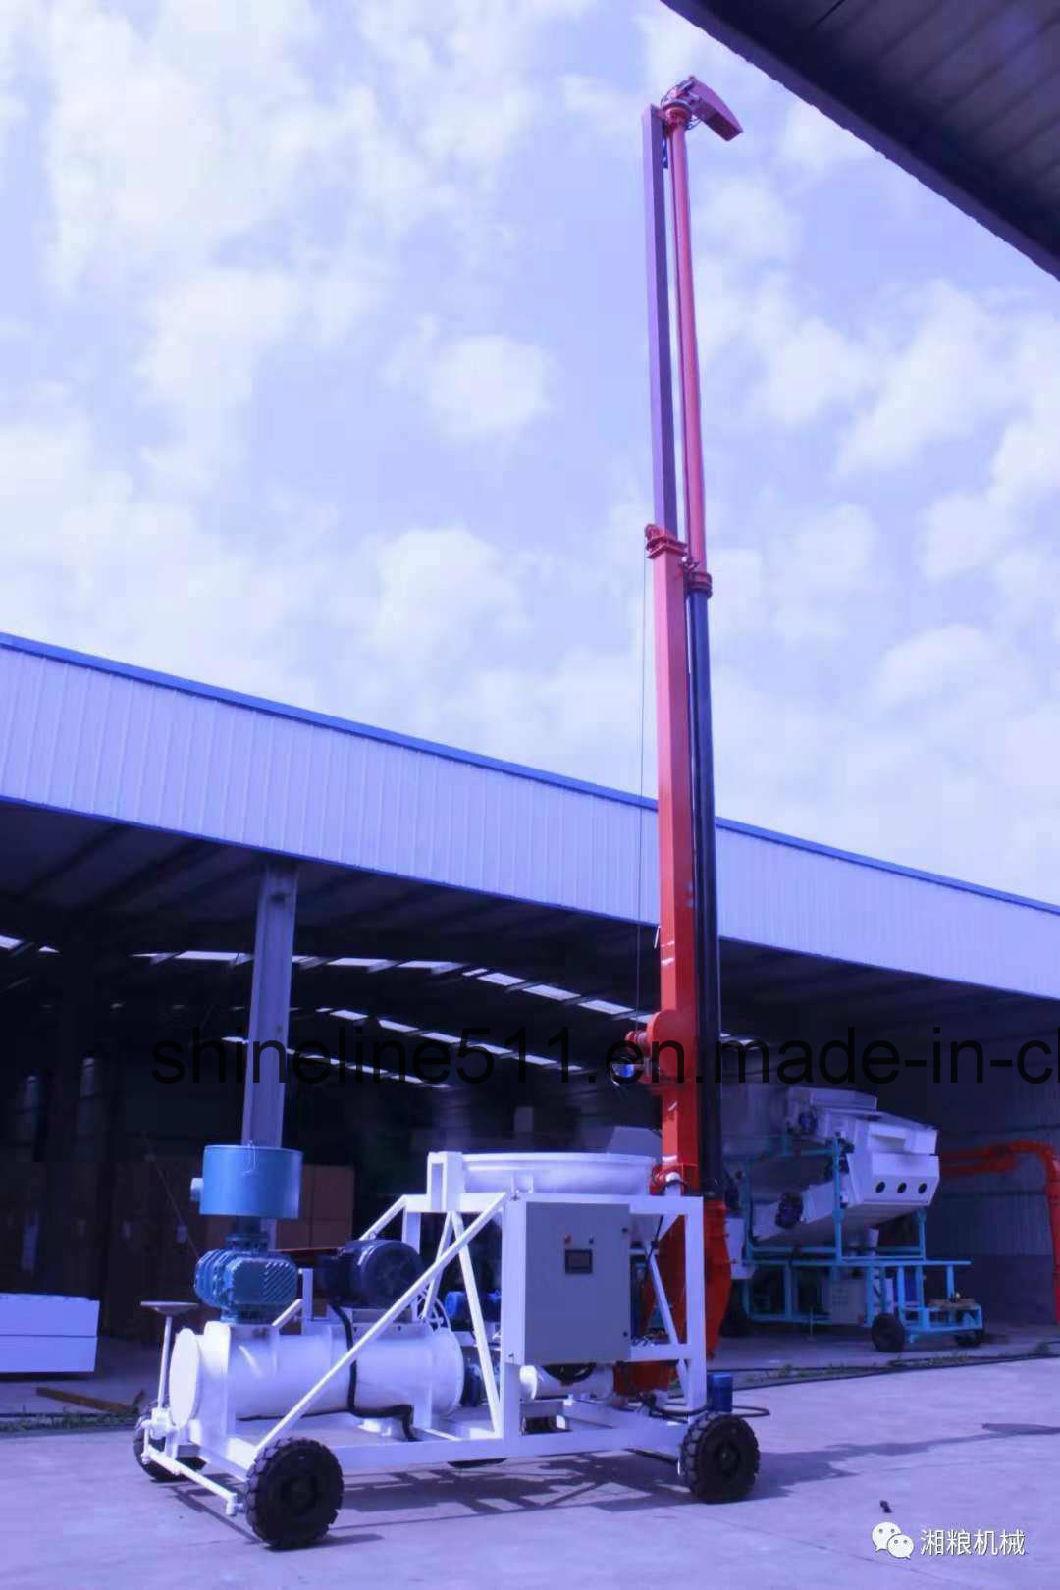 Available All The Granary Materials Bucket Elevator Storage Grain Unloader